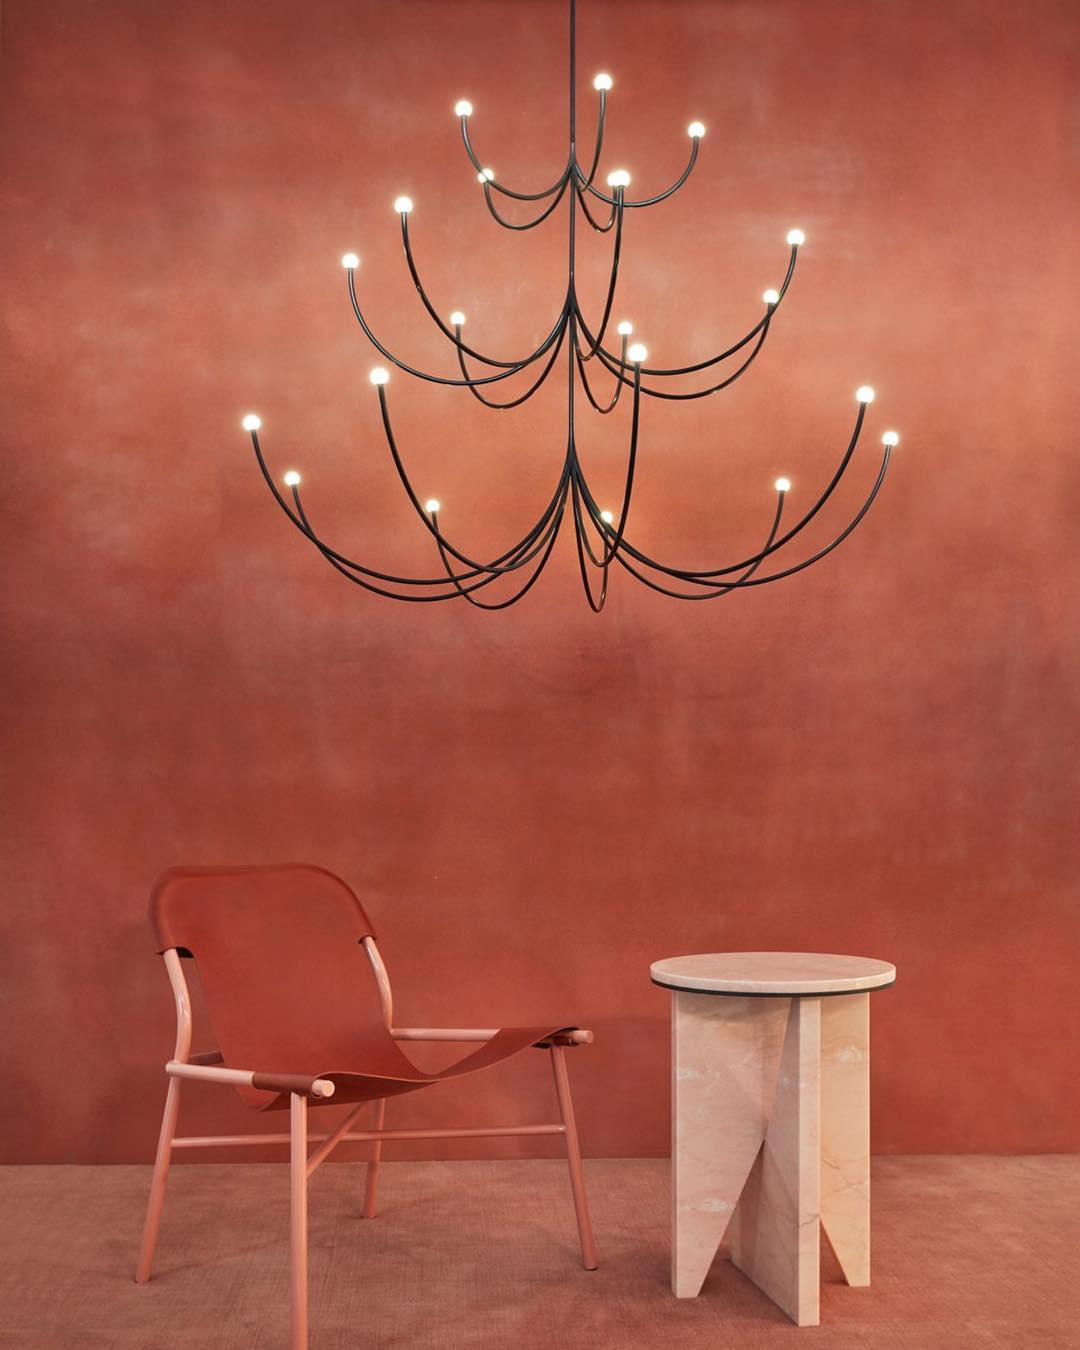 Arca Lighting system by Philippe Malouin - Matter Made "MM XVII" collection in Milan | Flodeau.com